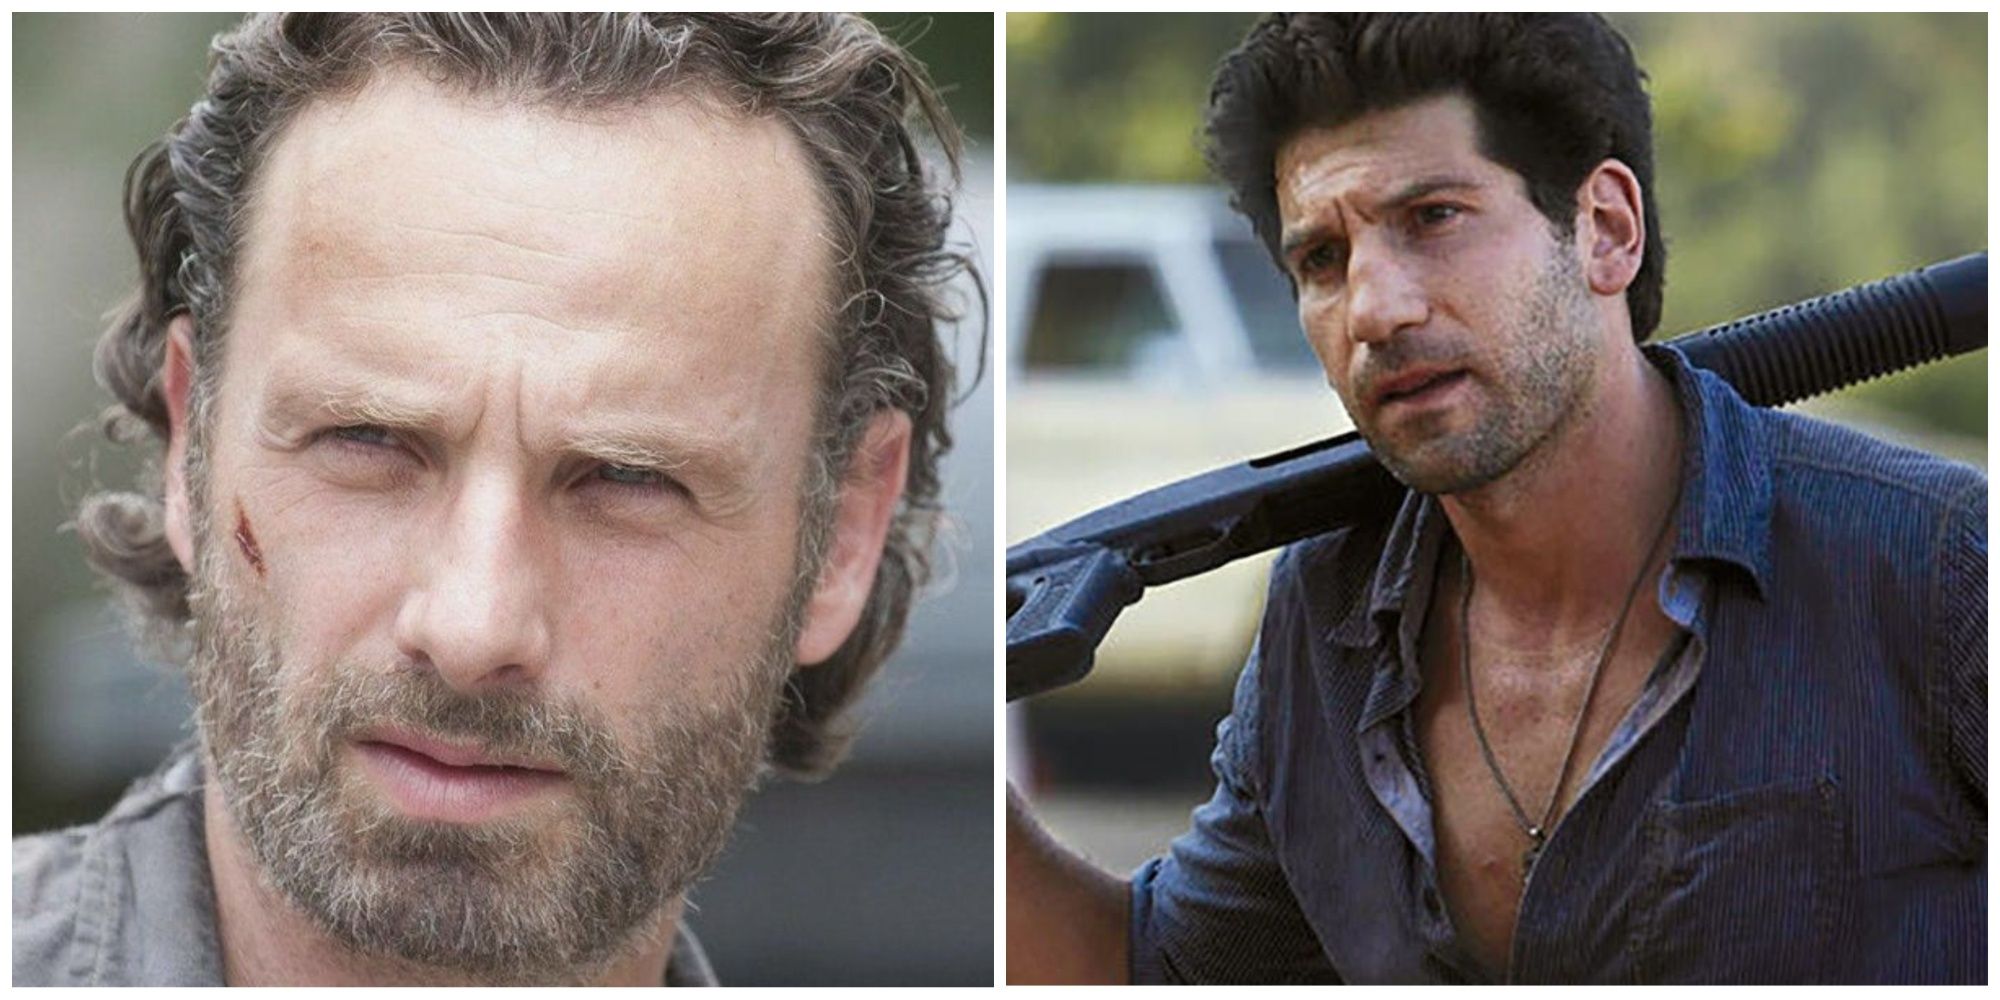 Rick and Shane in The Walking Dead